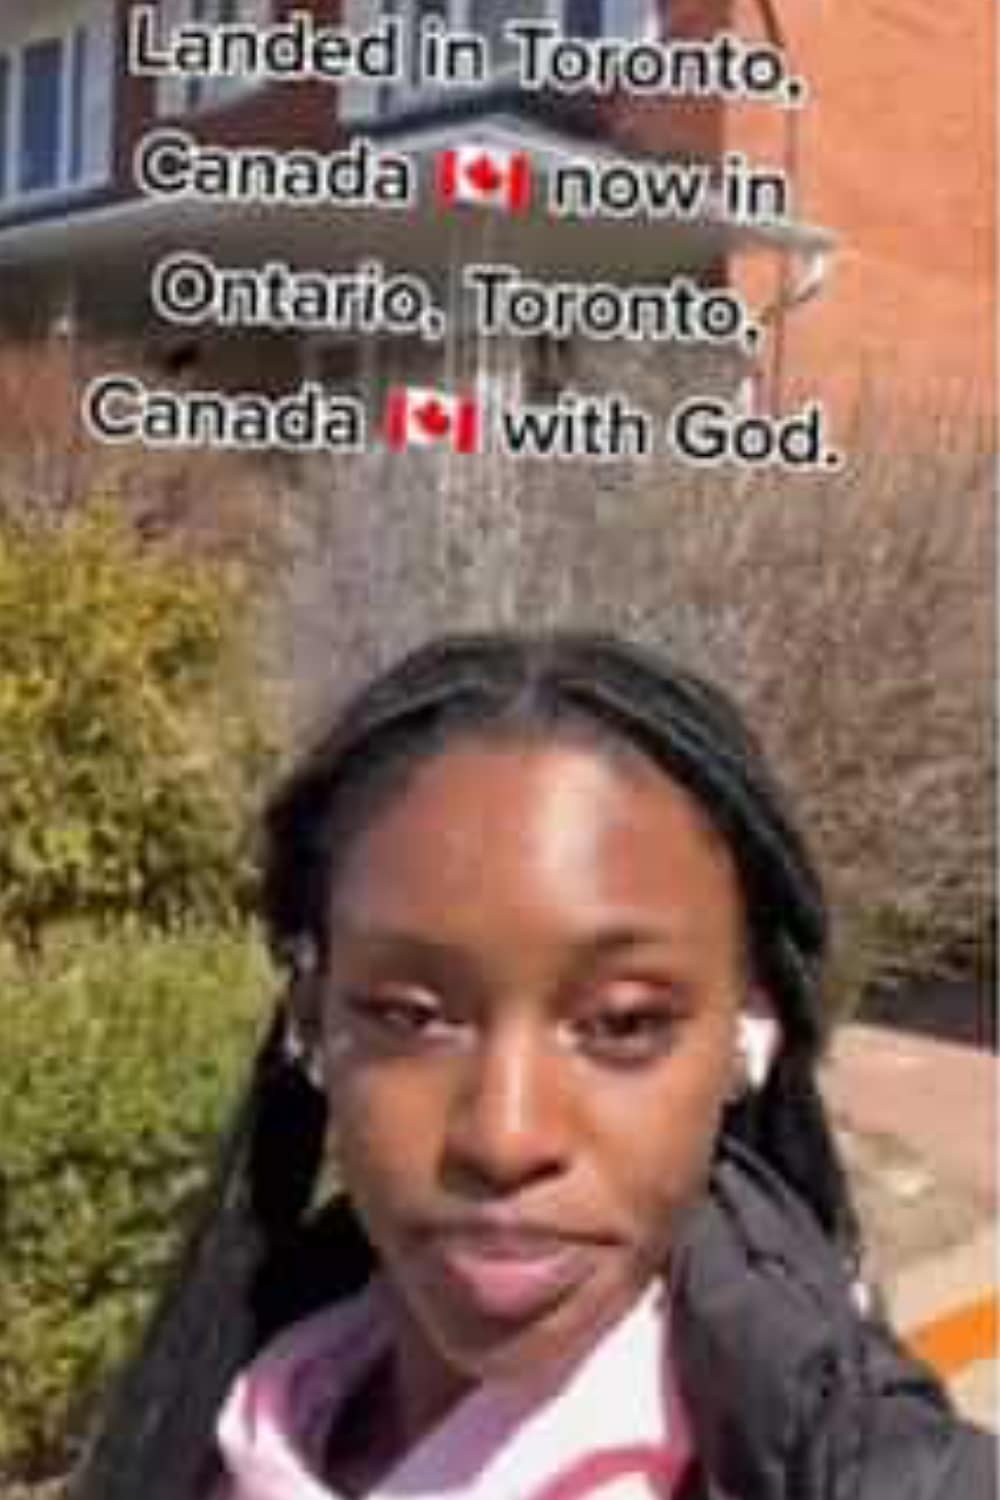 "Tap your grace" - Young Nigerian girl thrills people with sweet relocation moment (Video)